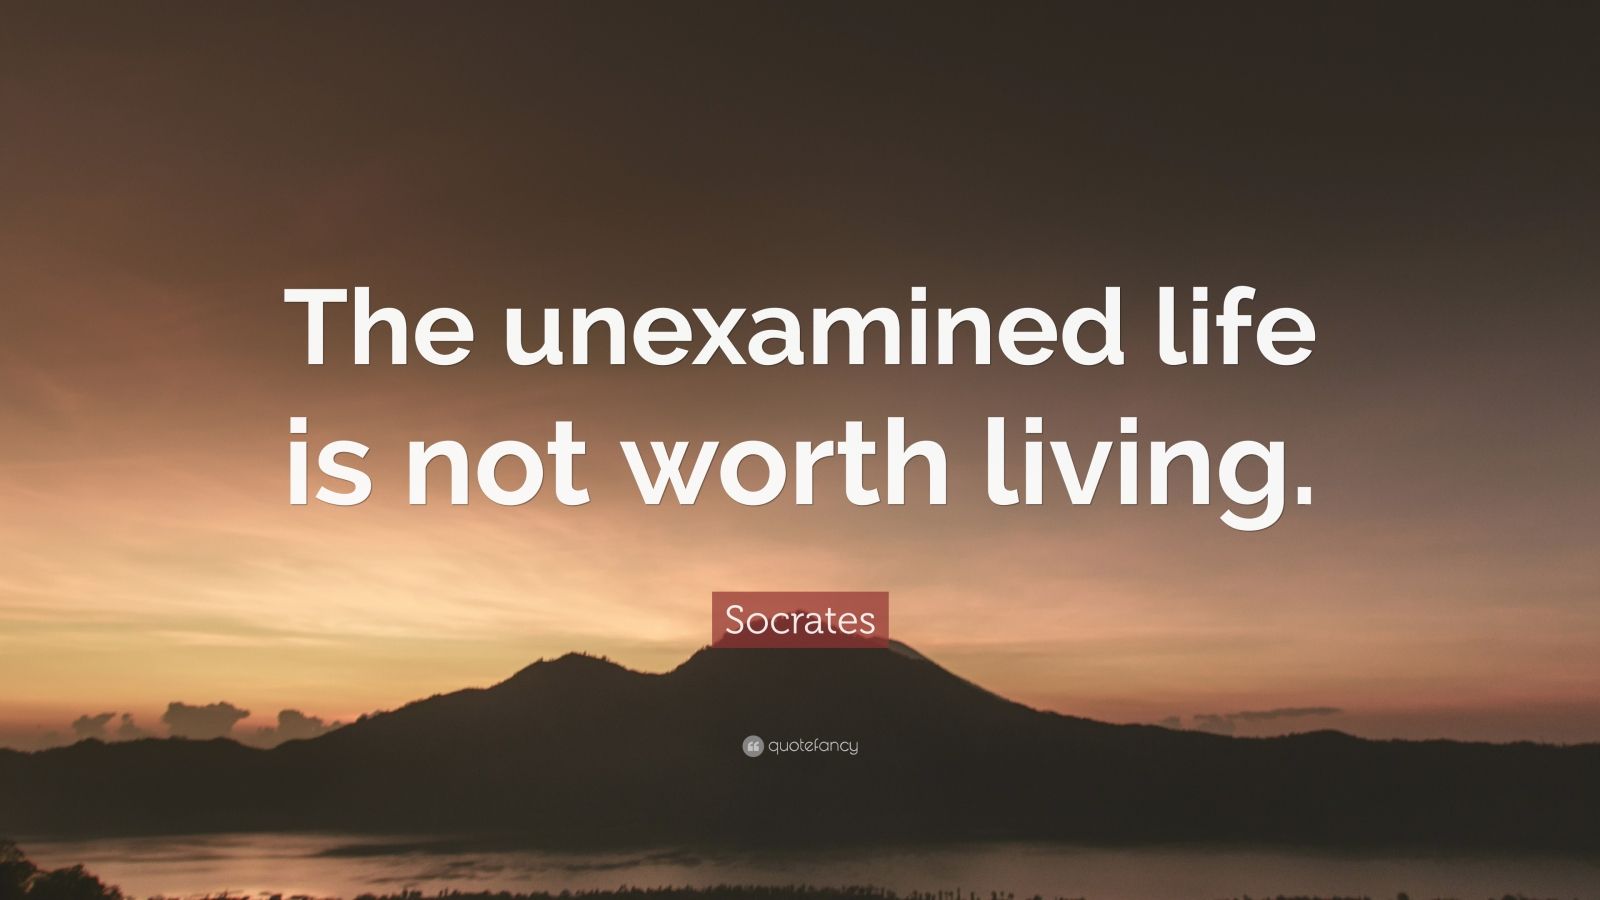 socrates and the unexamined life